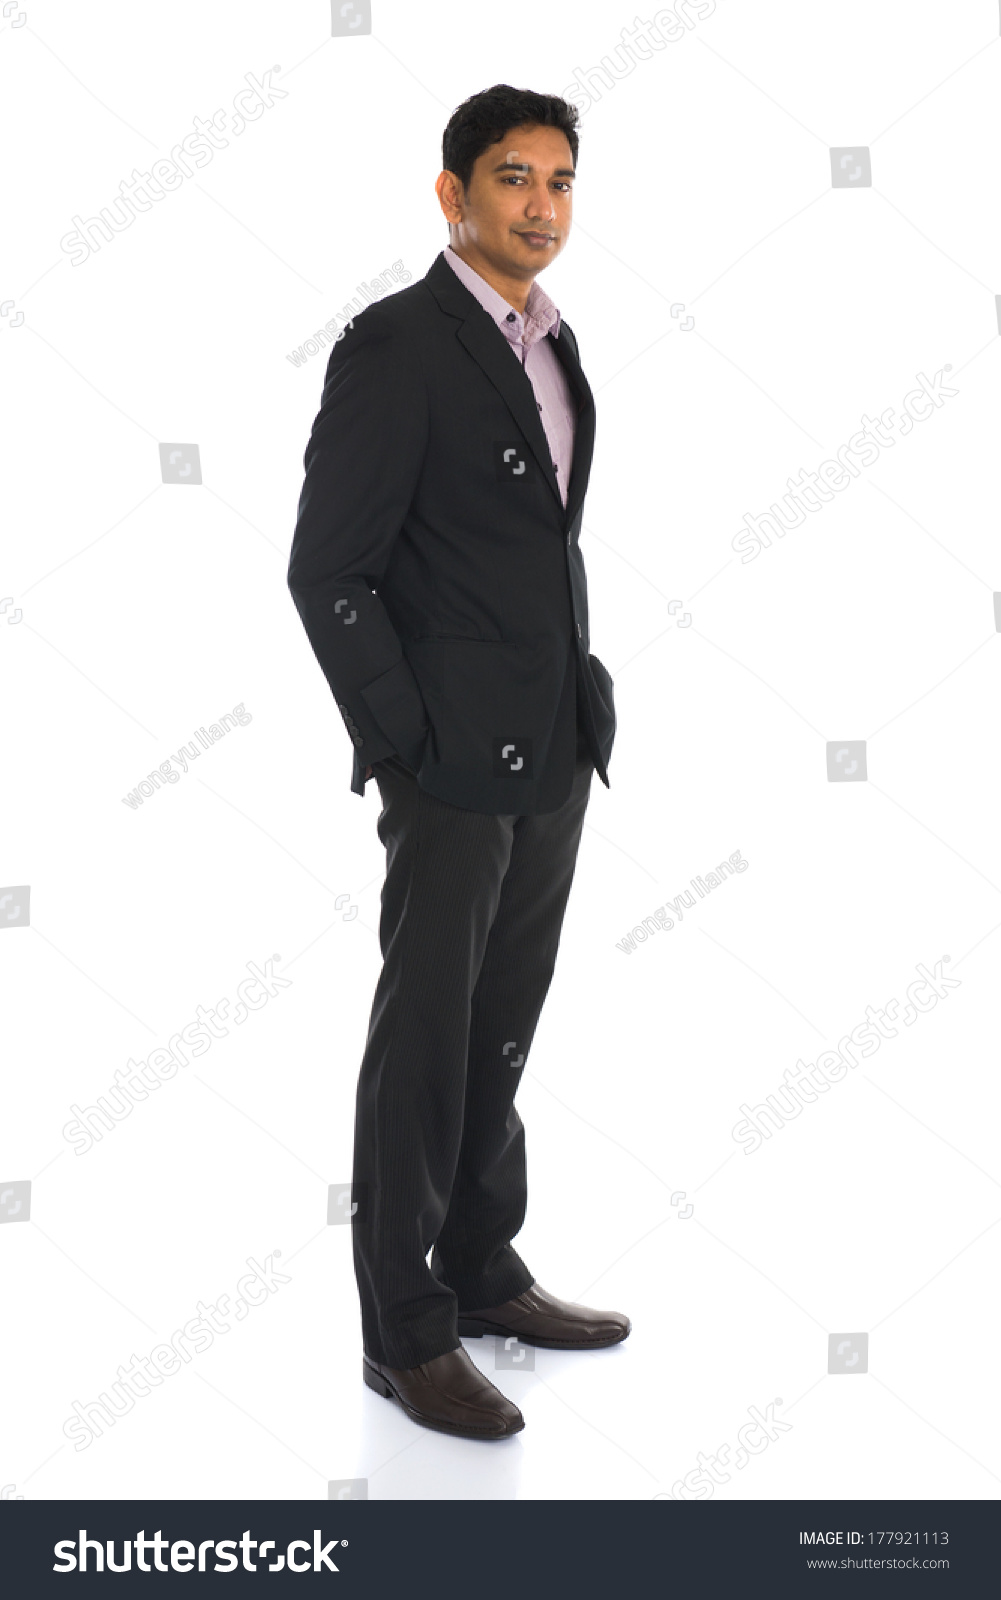 stock-photo-serious-indian-male-business-man-with-isolated-white-background-full-body-177921113.jpg